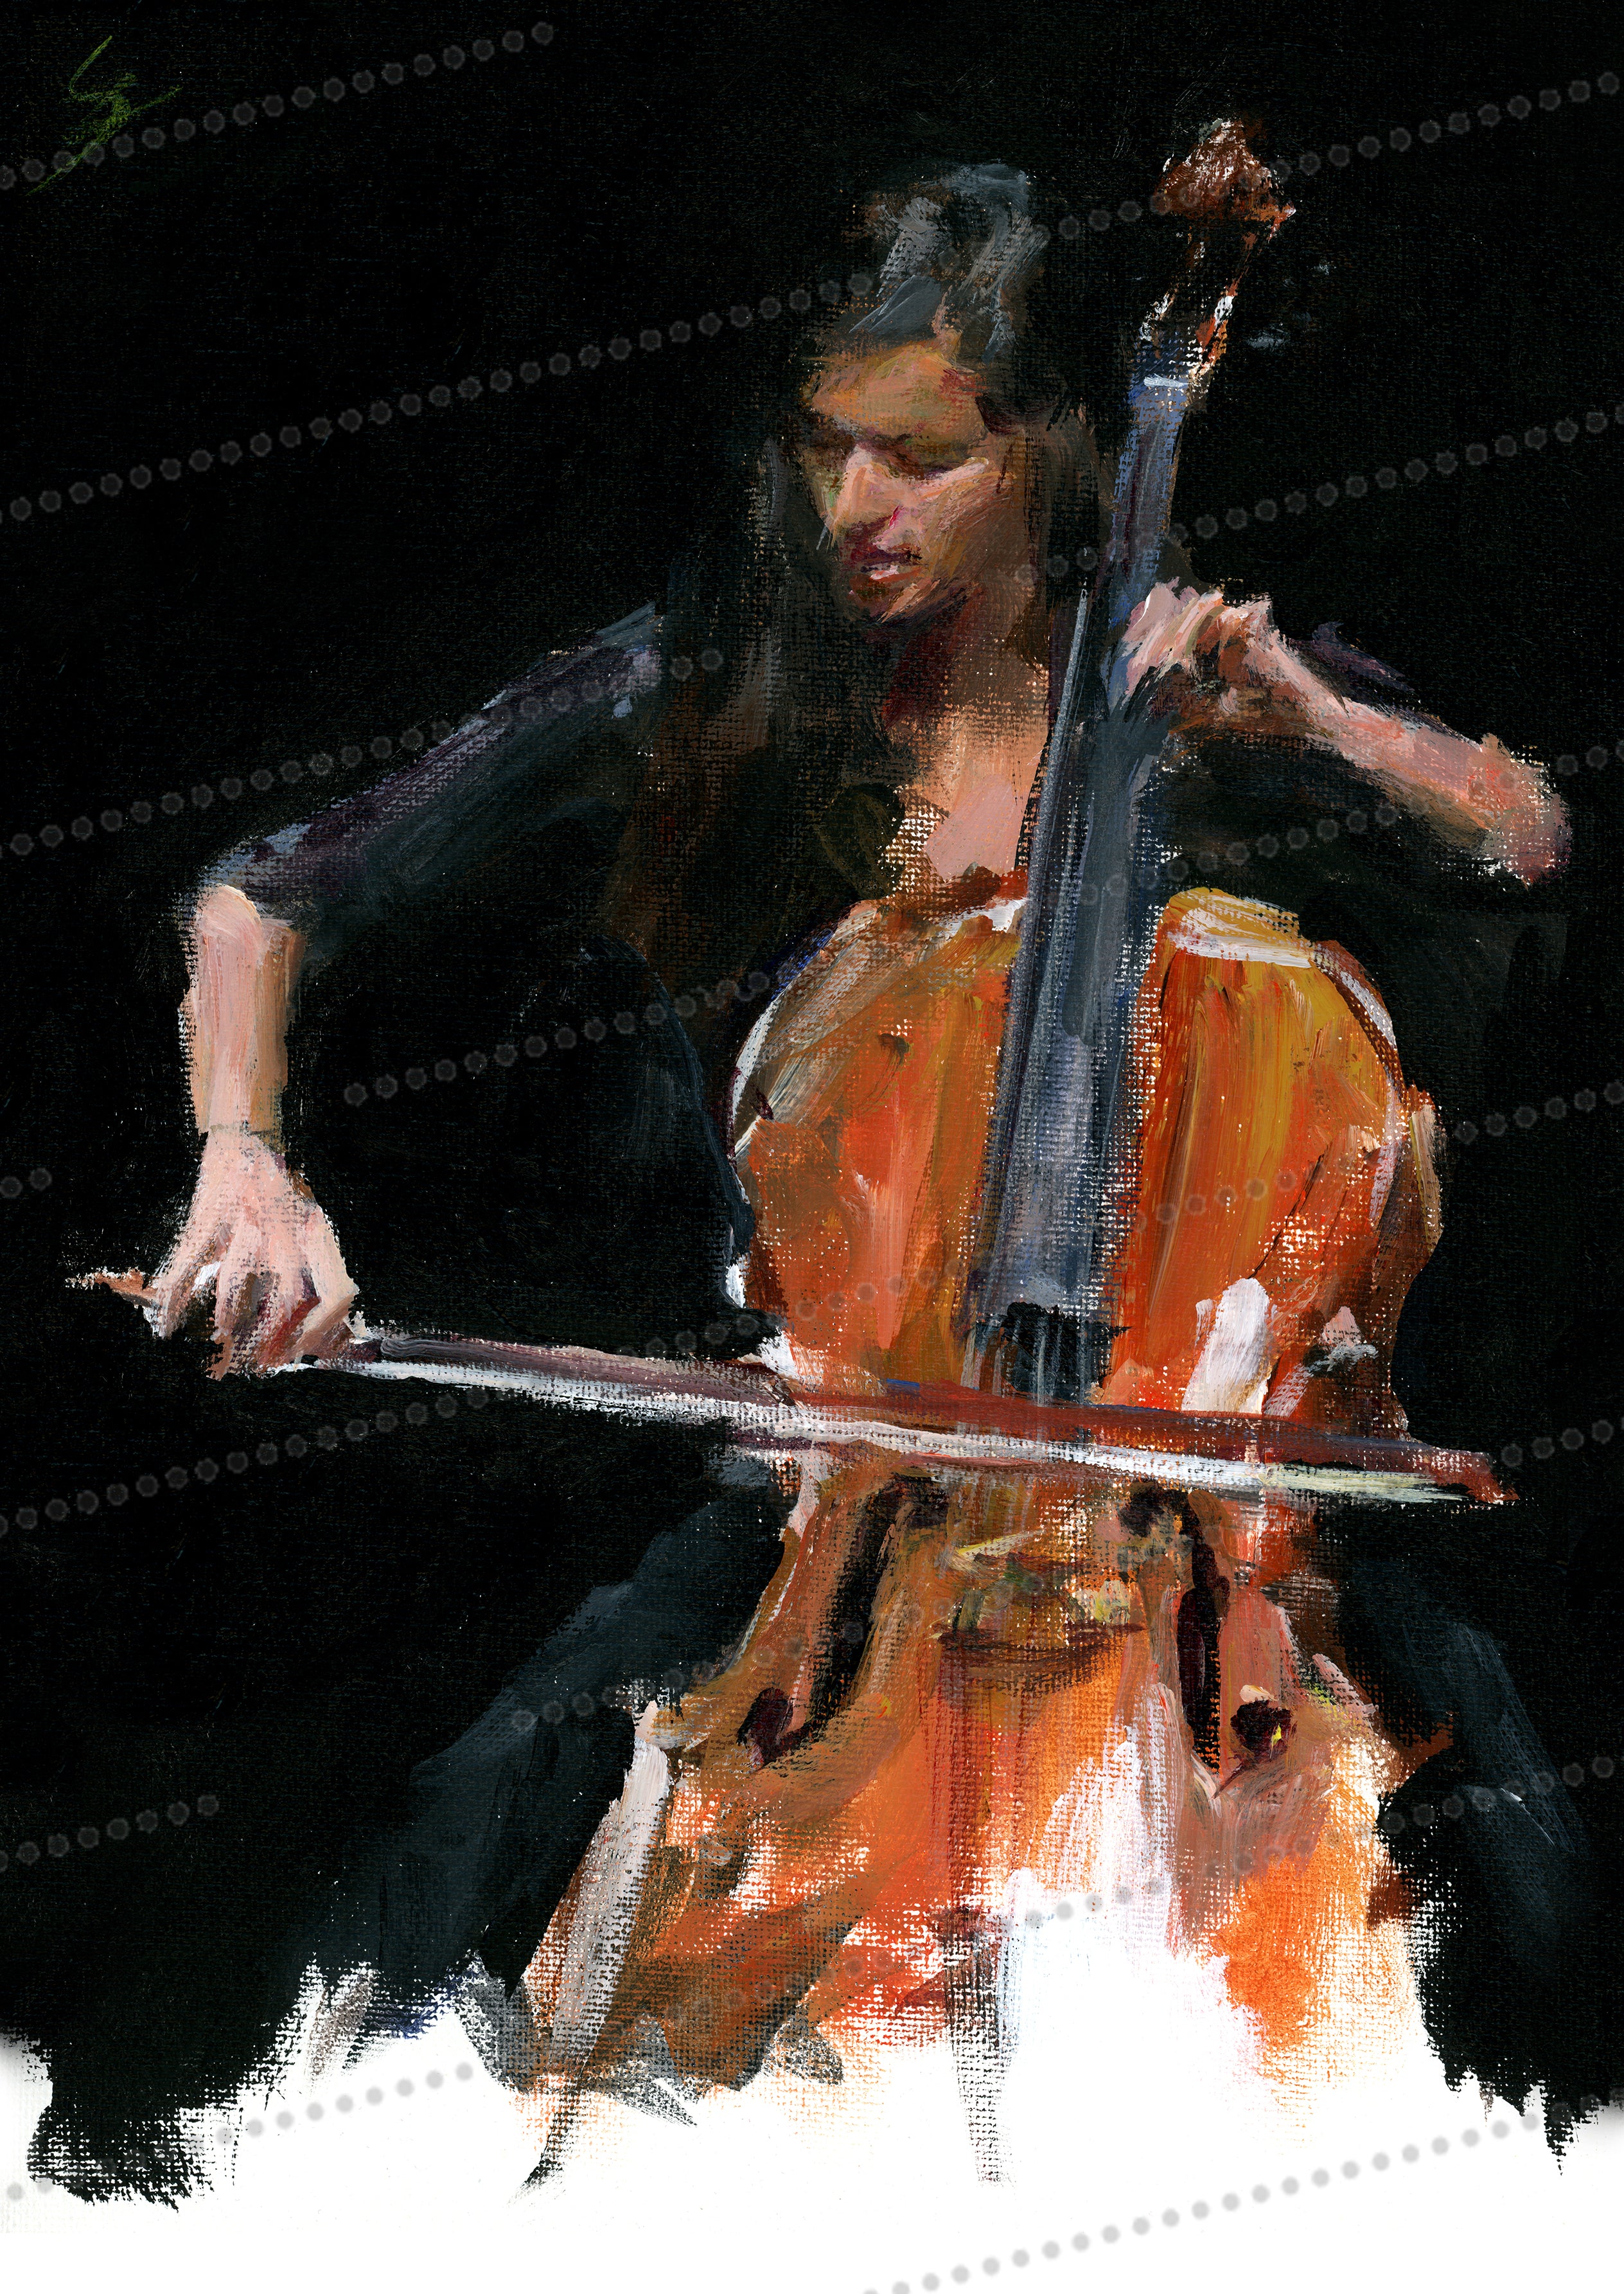 "Virtuoso" Painting of a cellist .Bubble-free stickers